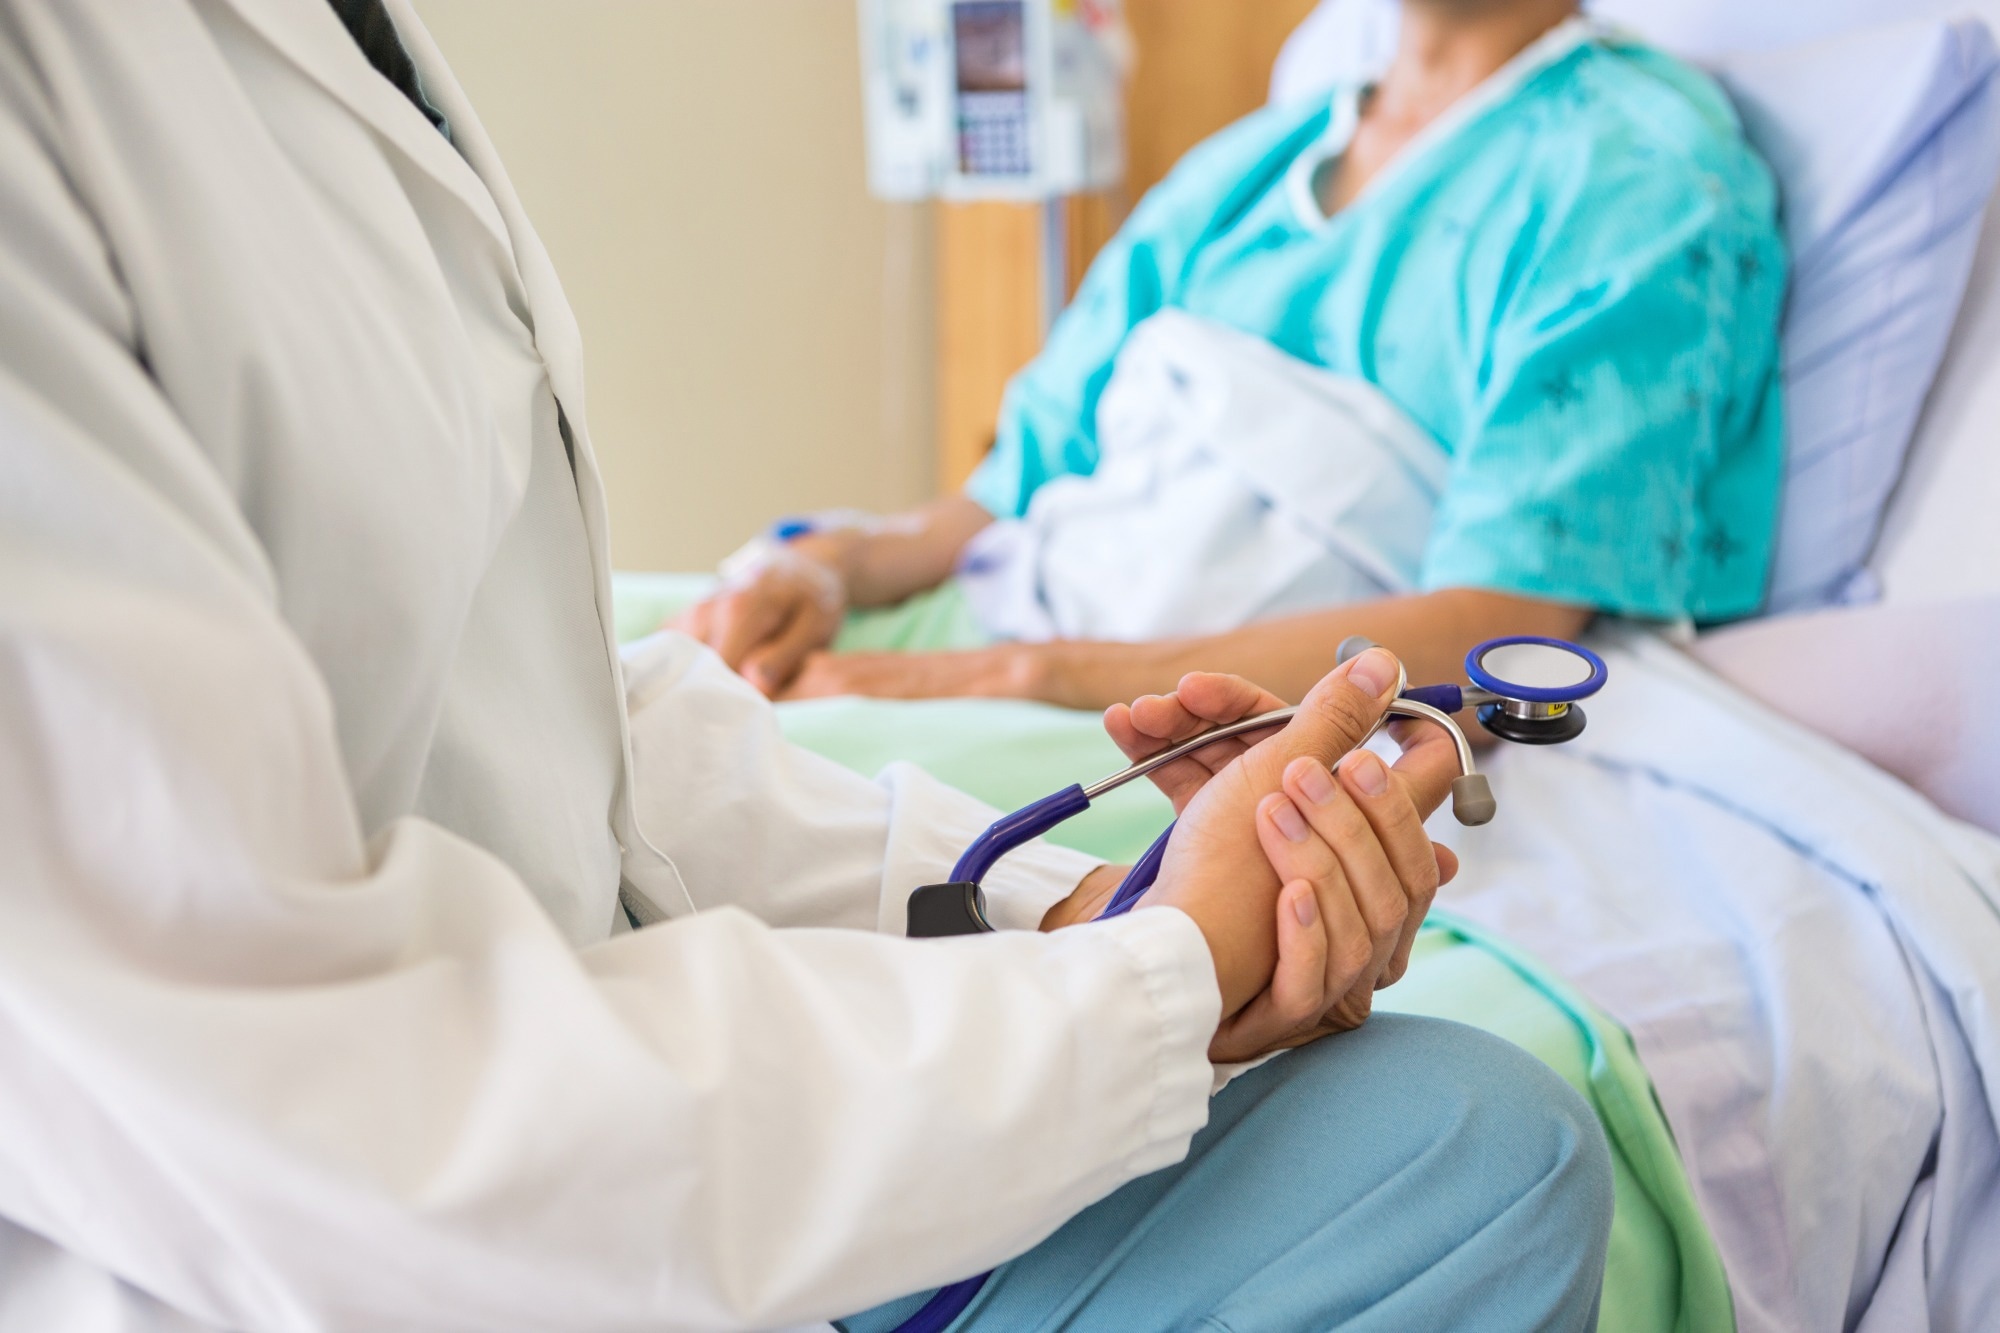 Study: Increased Hospitalizations Involving Fungal Infections during COVID-19 Pandemic, United States, January 2020–December 2021. Image Credit: Tyler Olson/Shutterstock.com